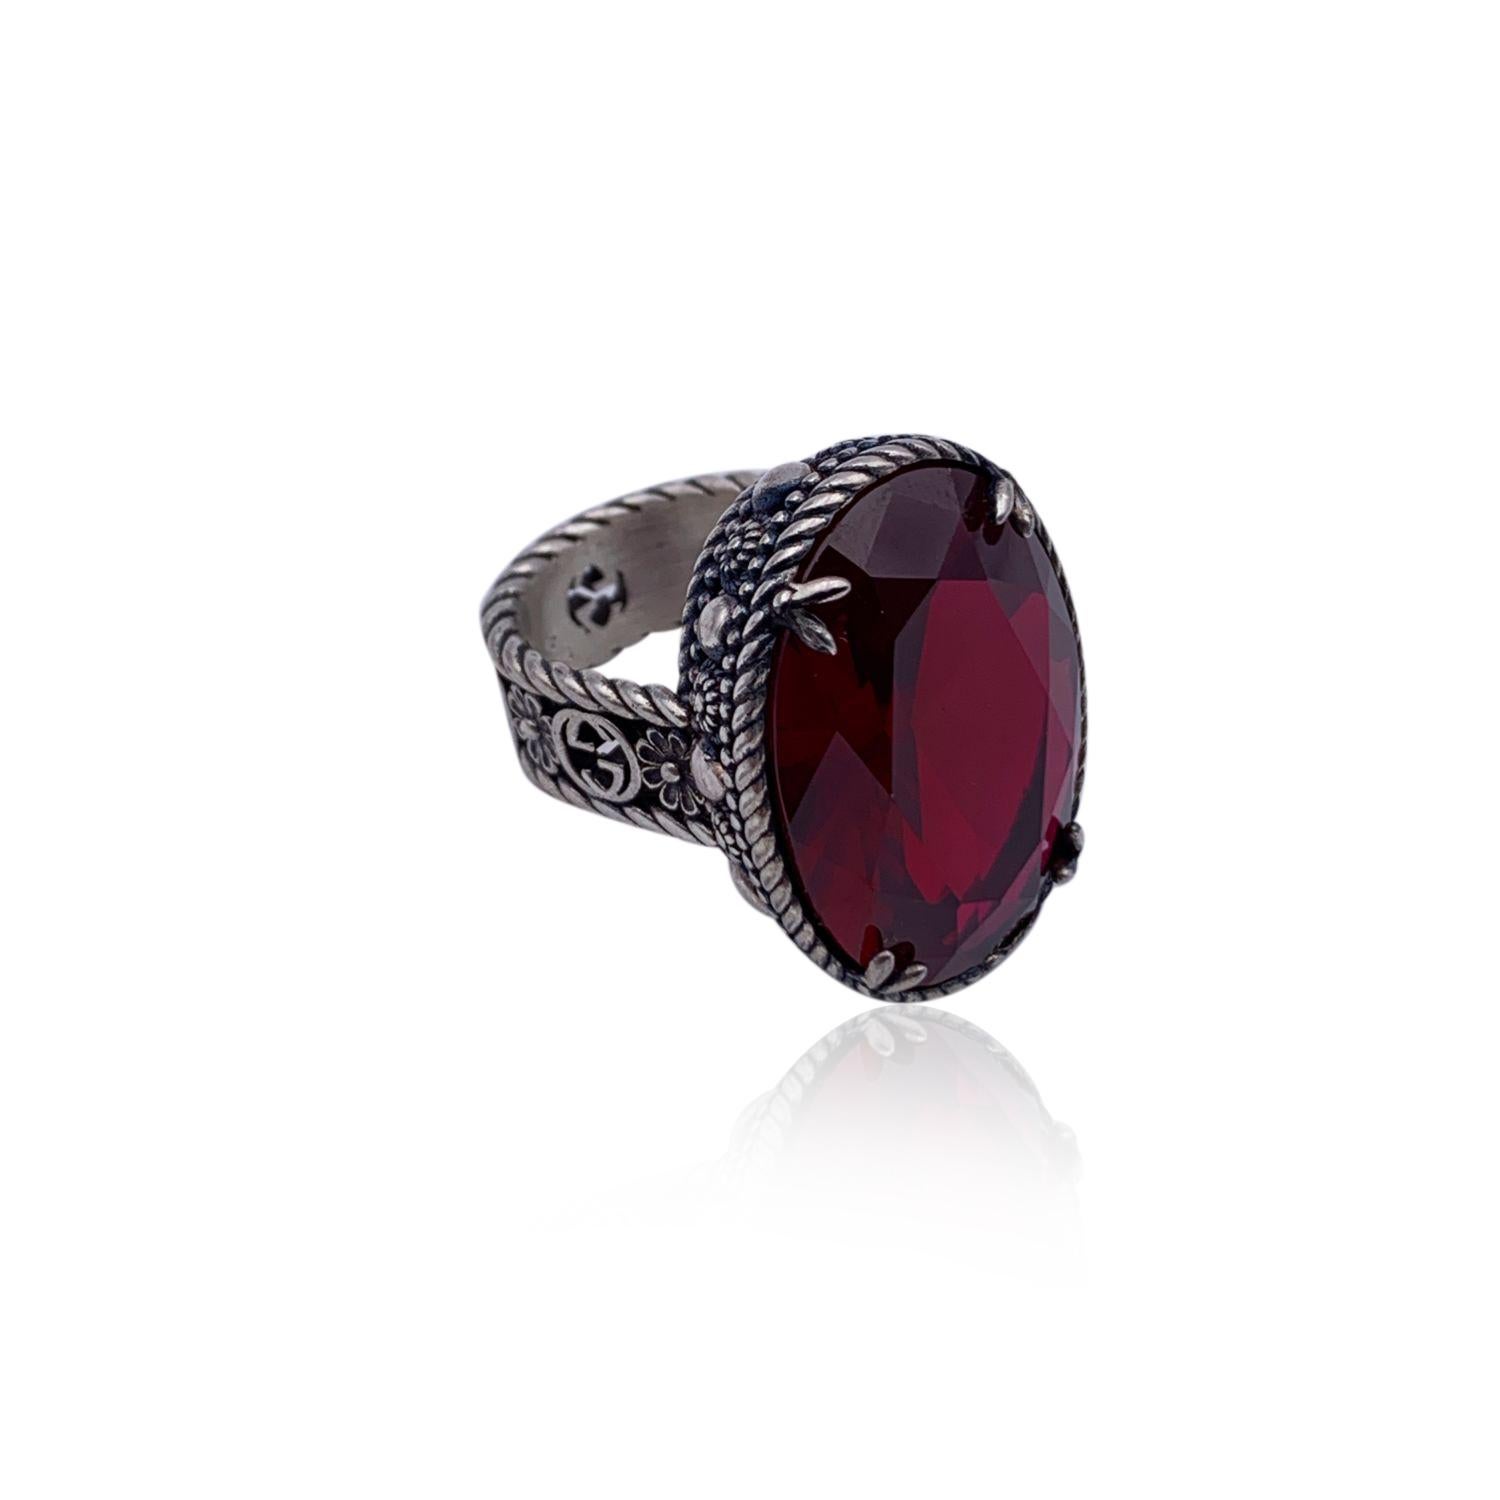 Beautiful GUCCI Sterling Silver Statement Ring. Crafted of aged finish sterling silver 925. Big red oval synthetic stone on top. GG - Gucci logo detailing. Size: 16 IT (7.5 US size, 56 FR size). Max width on the top: 2 cm. 'Gucci - Made in Italy '